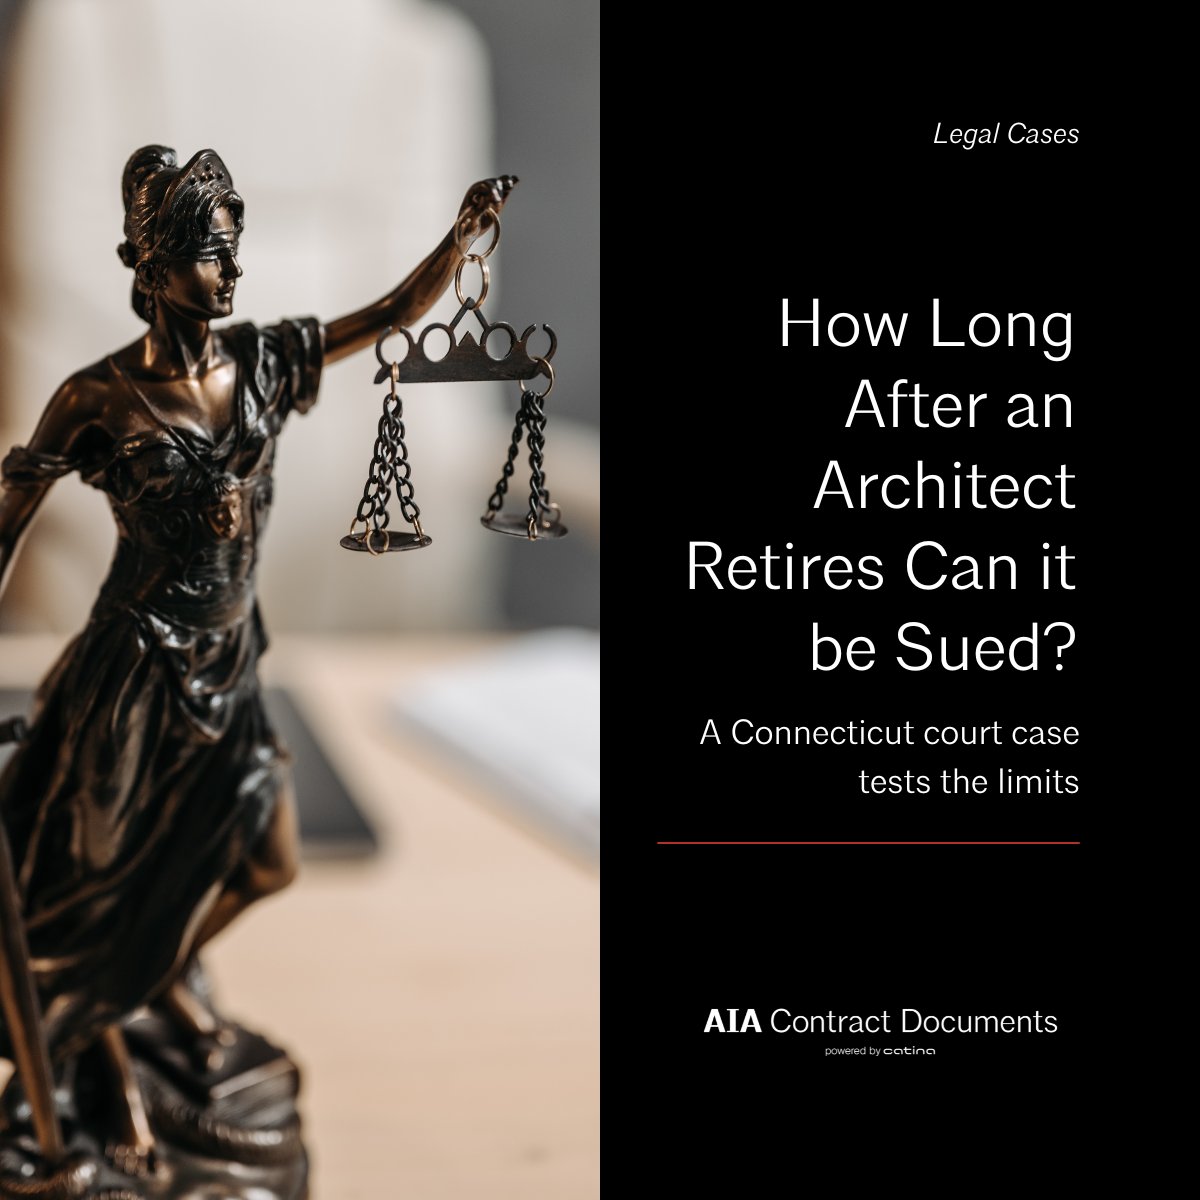 Think you're in the clear once you retire as an architect? Think again. The case of Hockenberry v. Wapping Cemetery Association, Inc. serves as a reminder that you need to consider liability when planning for your future. bit.ly/49AddHs #architecture #ConstructionLaw